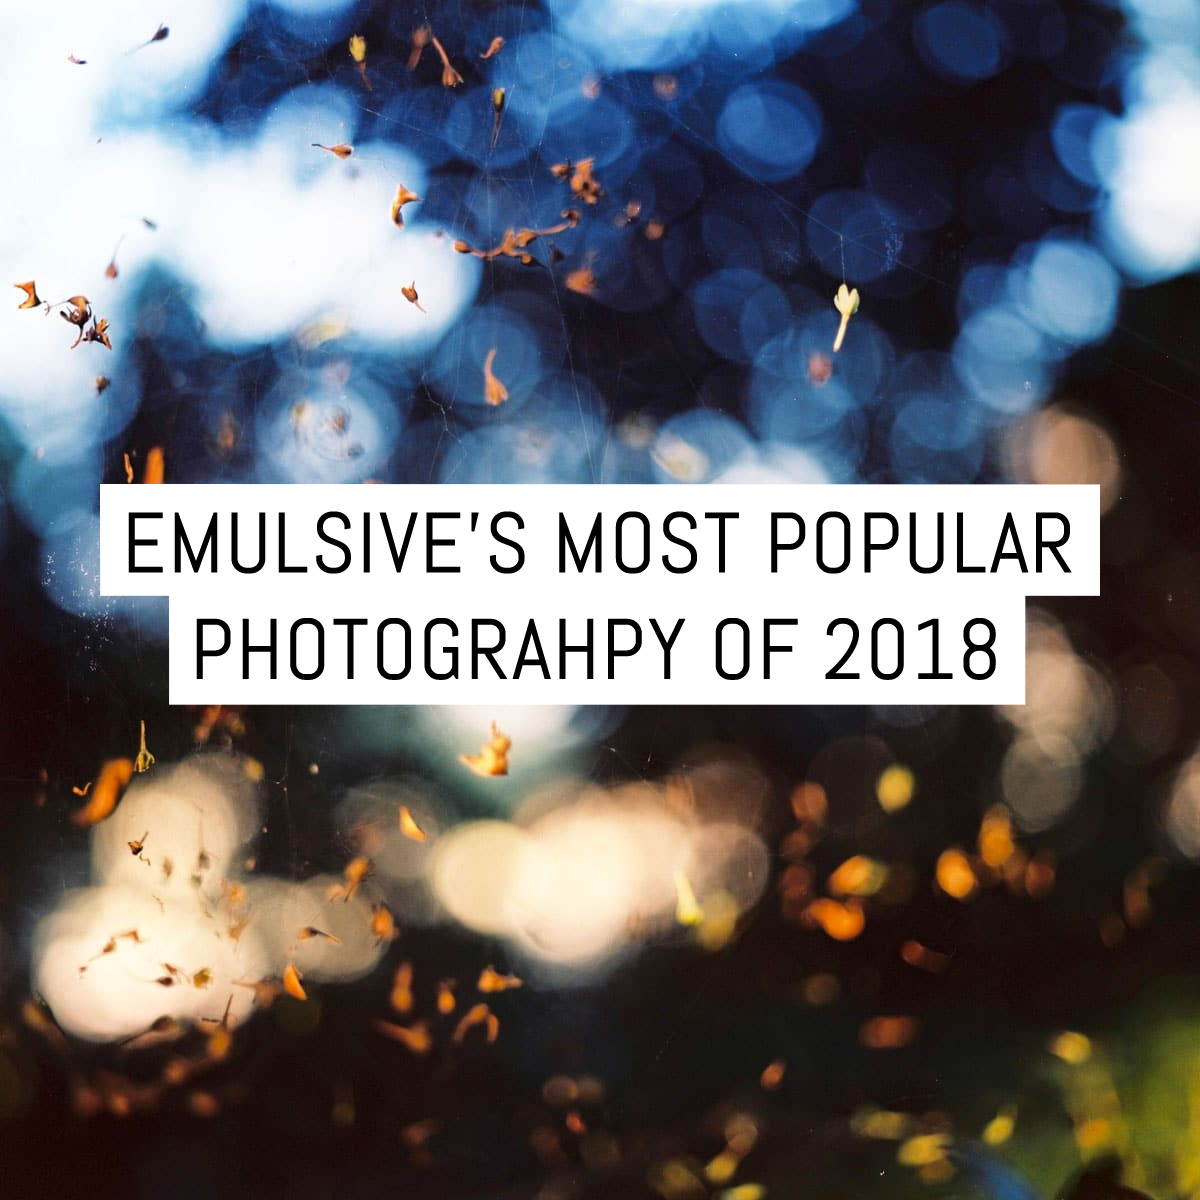 EMULSIVE’s most popular film photography posts of 2018